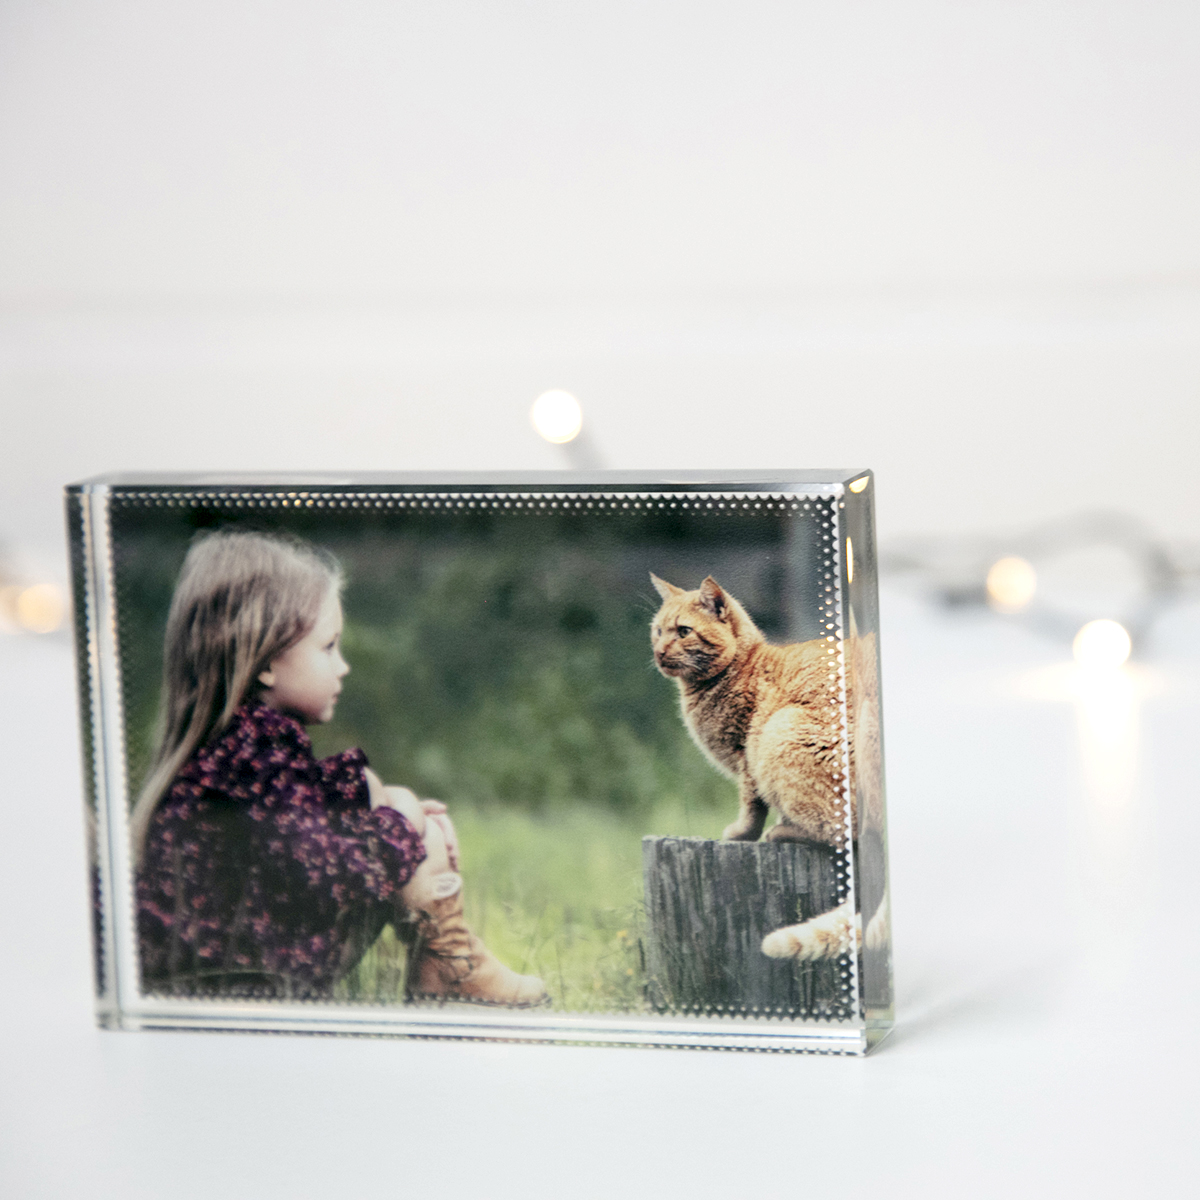 Glass photo block with image of girl and orange cat backlit by fairy lights